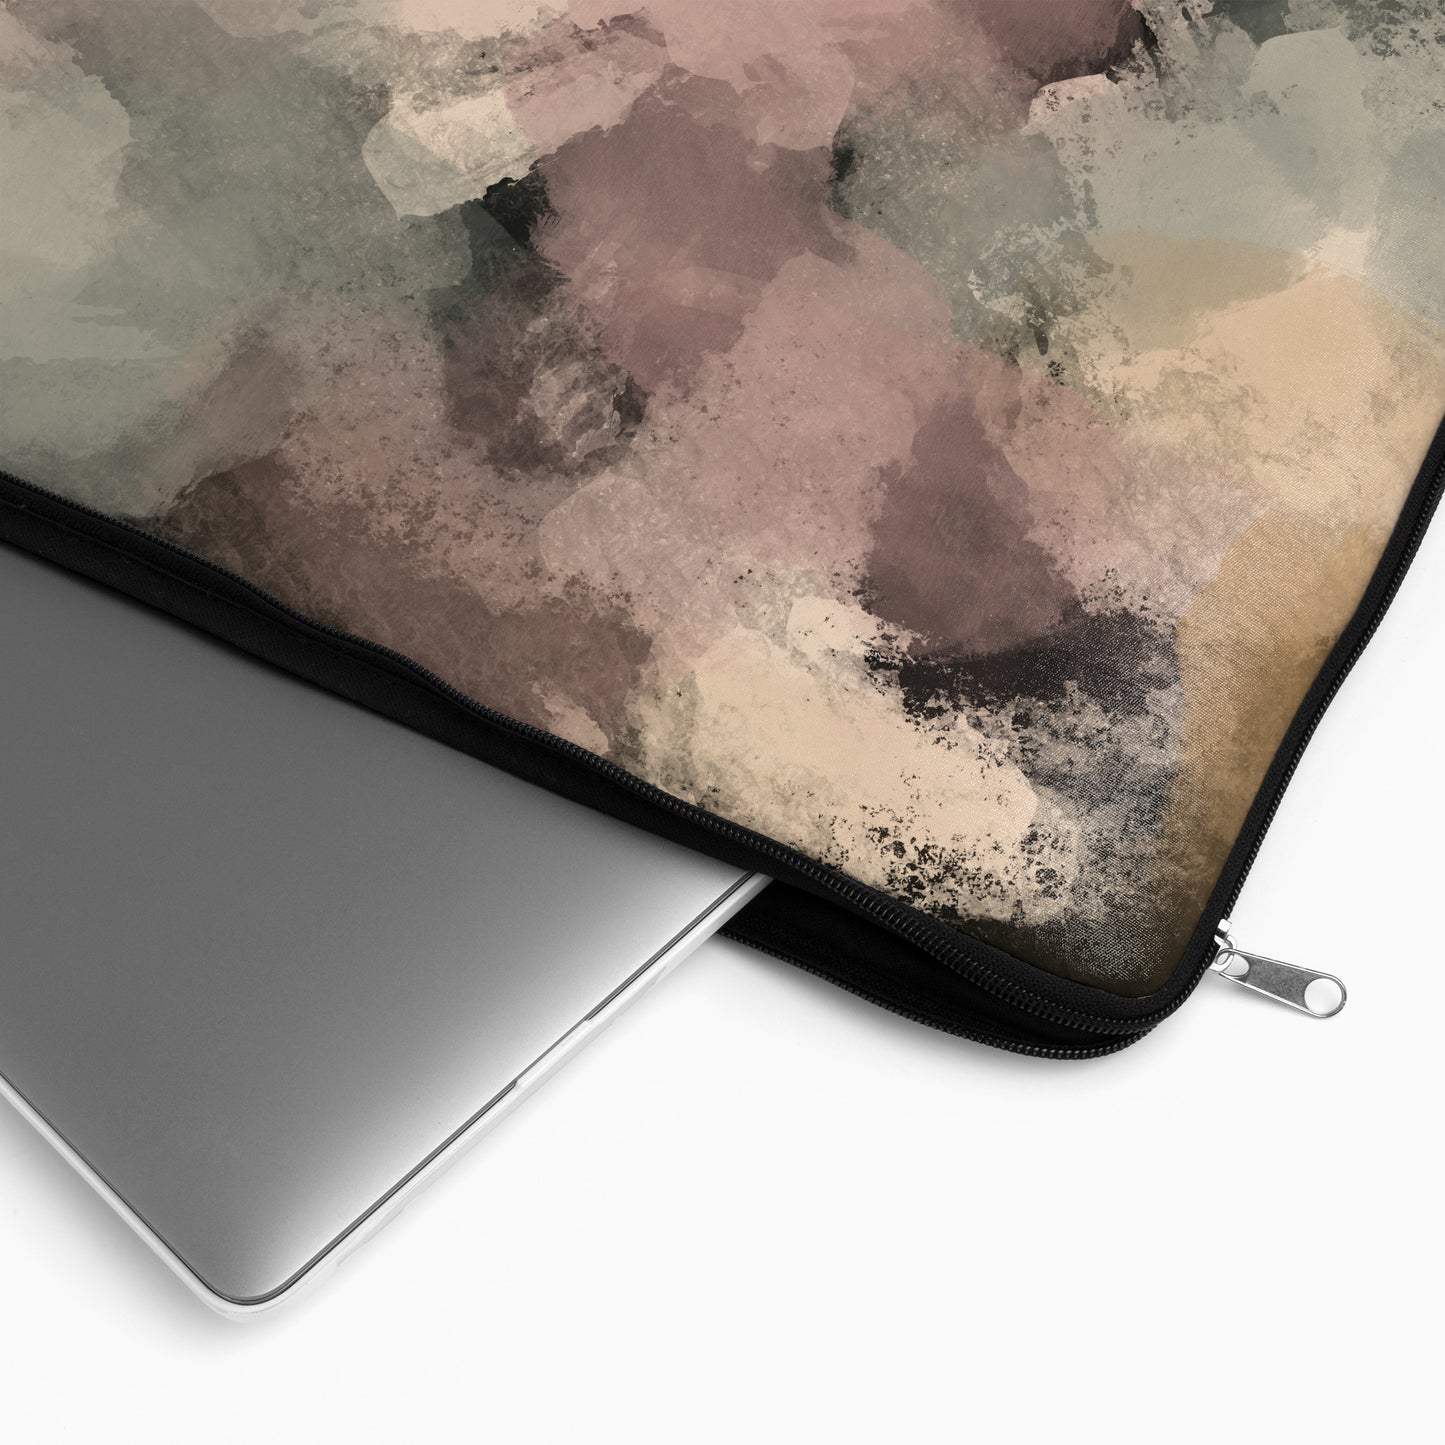 Abstract Grunge Brushes MacBook Sleeve